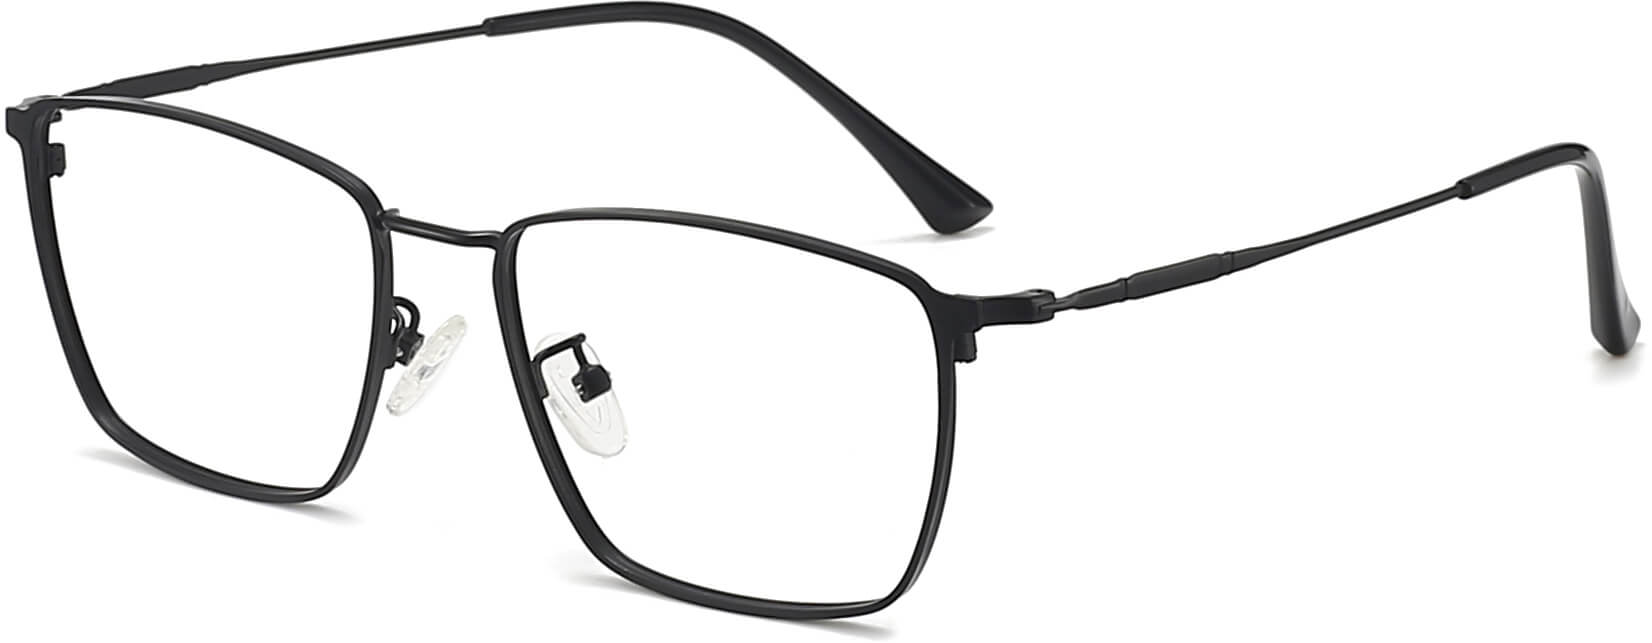 Jefferson Square Black Eyeglasses from ANRRI, angle view